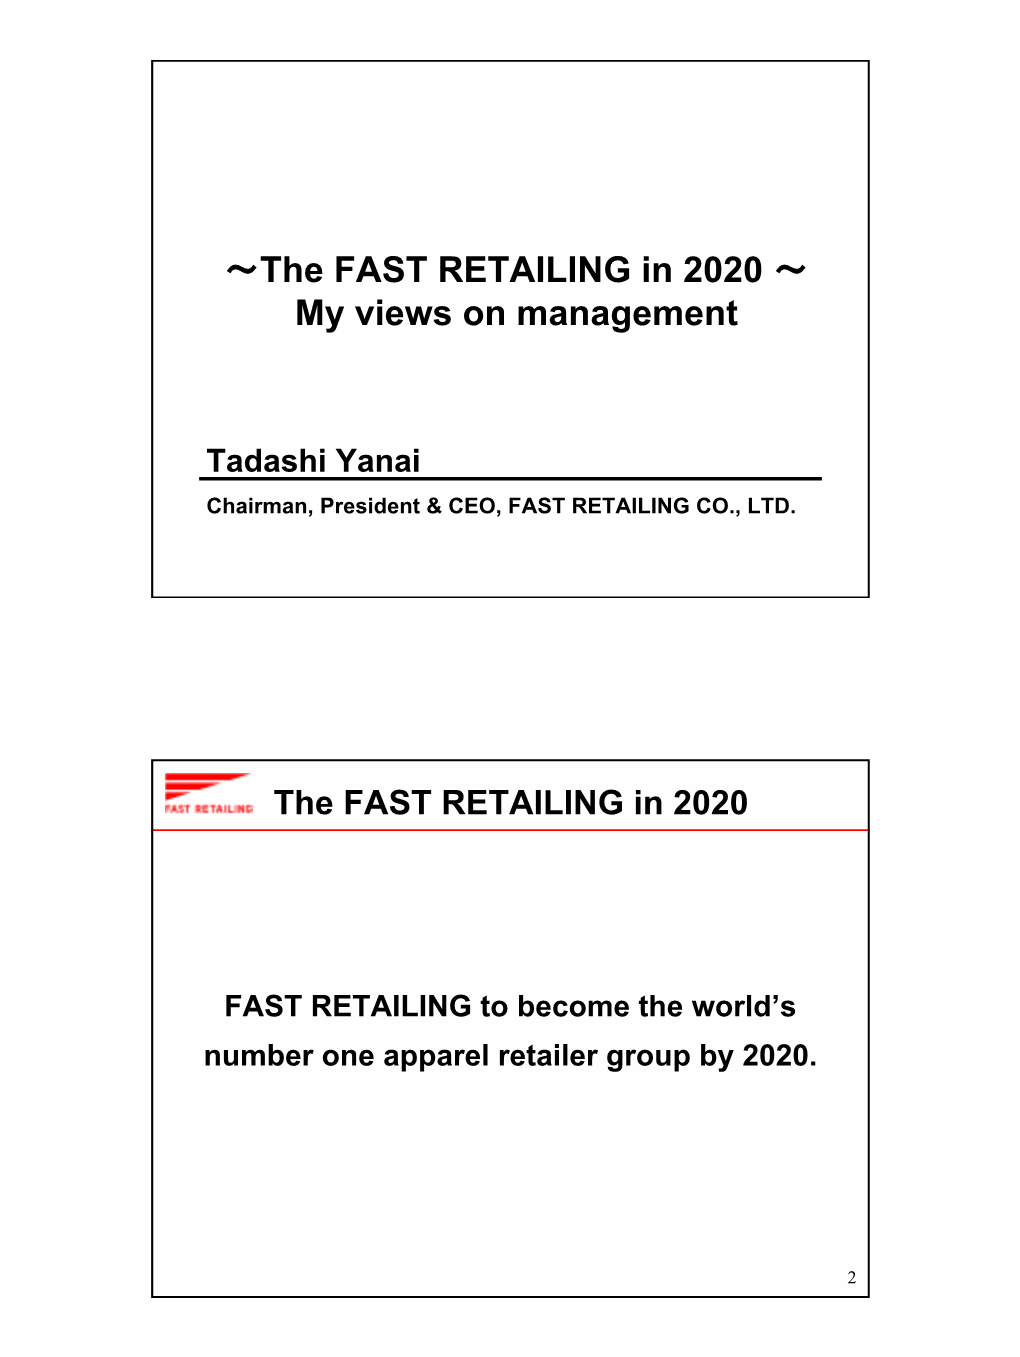 ∼The FAST RETAILING in 2020 ∼ My Views on Management